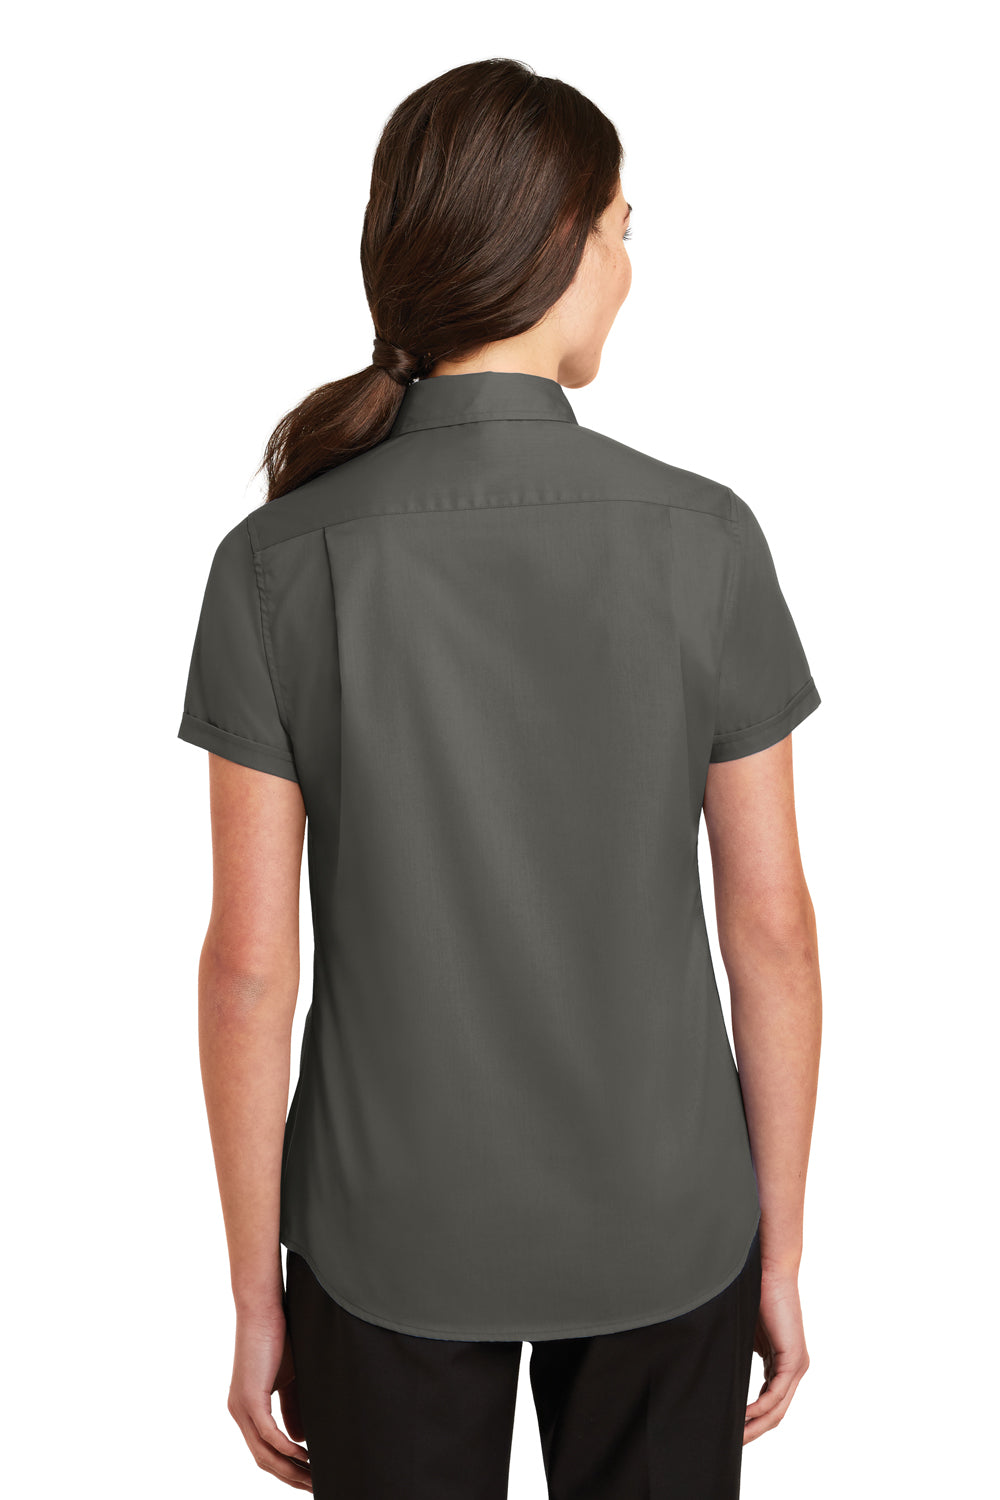 Port Authority L664 Womens SuperPro Wrinkle Resistant Short Sleeve Button Down Shirt Sterling Grey Back